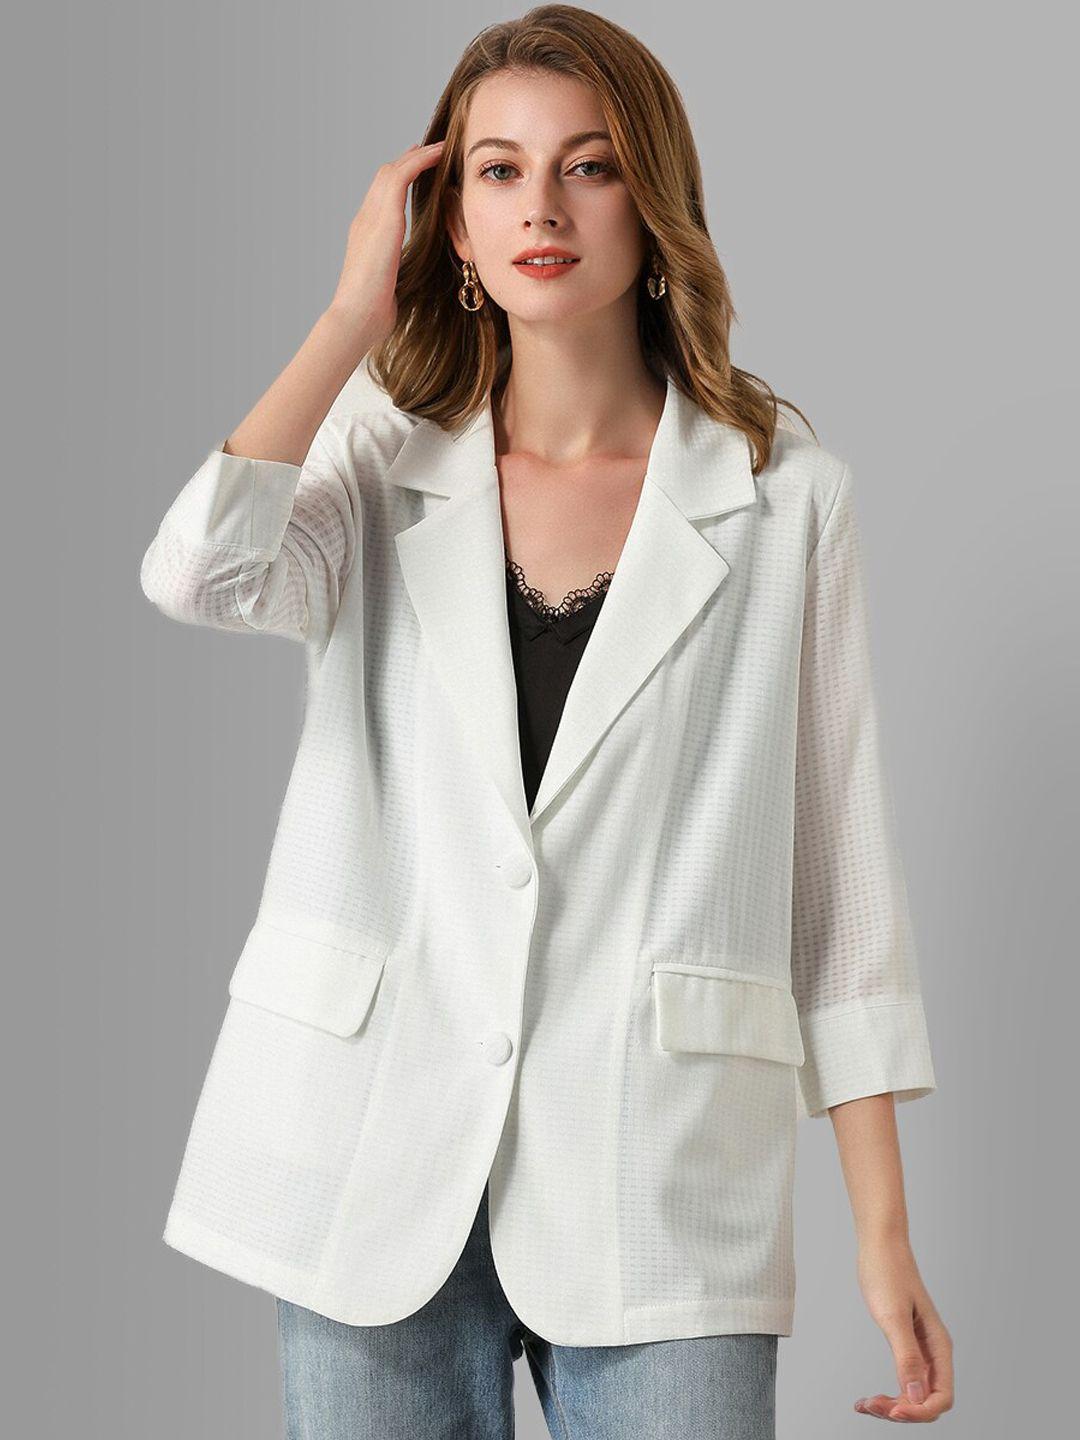 jc collection women white solid casual over coats